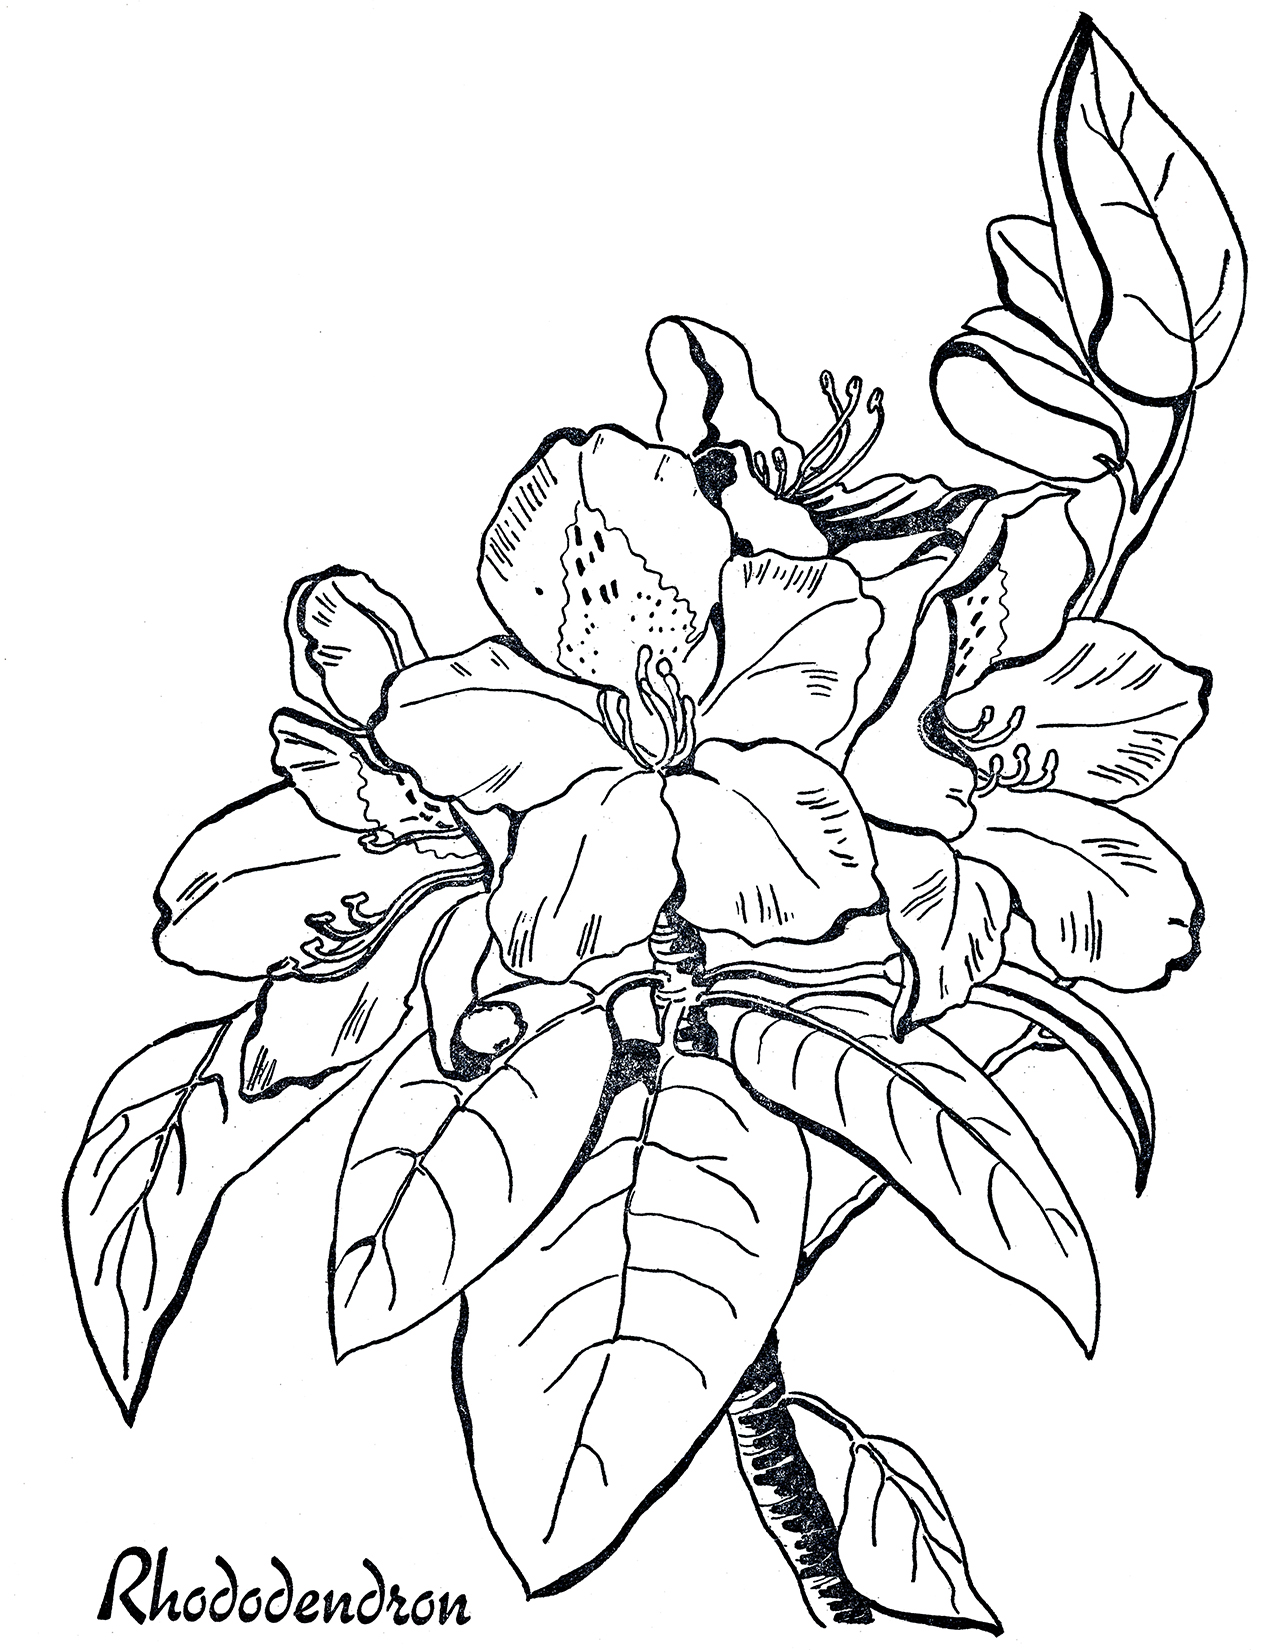 coloring pages for rhododendron - photo #3